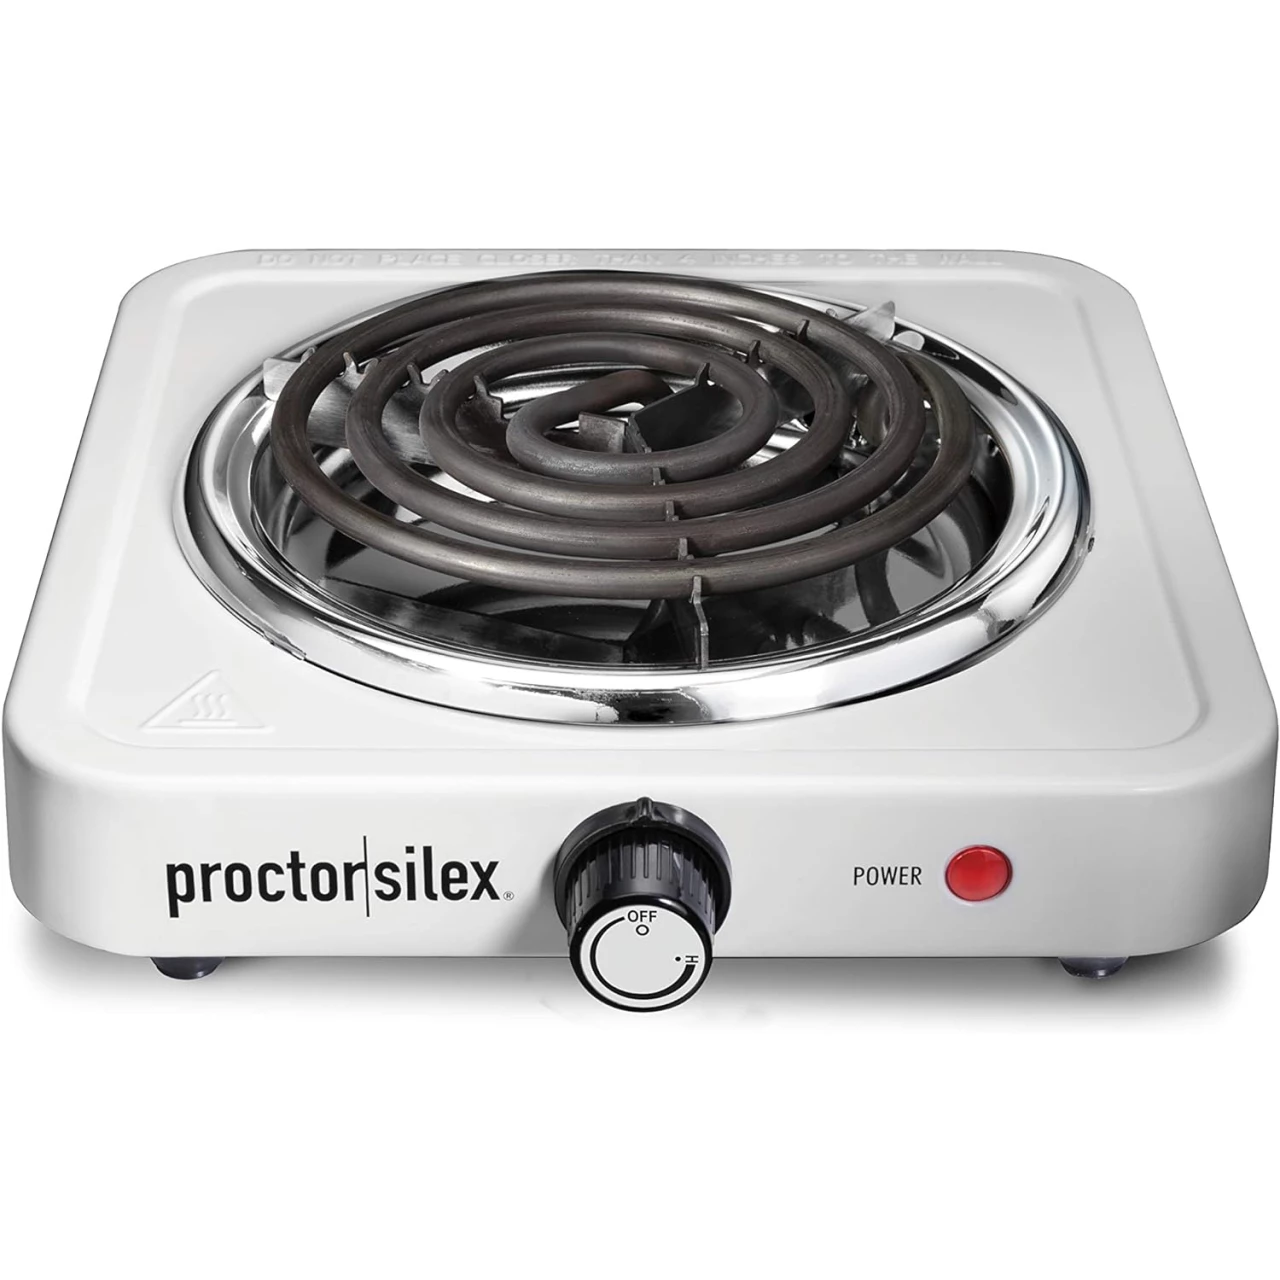 Proctor Silex Electric Single Burner Cooktop, Compact and Portable, Adjustable Temperature Hot Plate, 1200 Watts, 34106, White &amp; Stainless